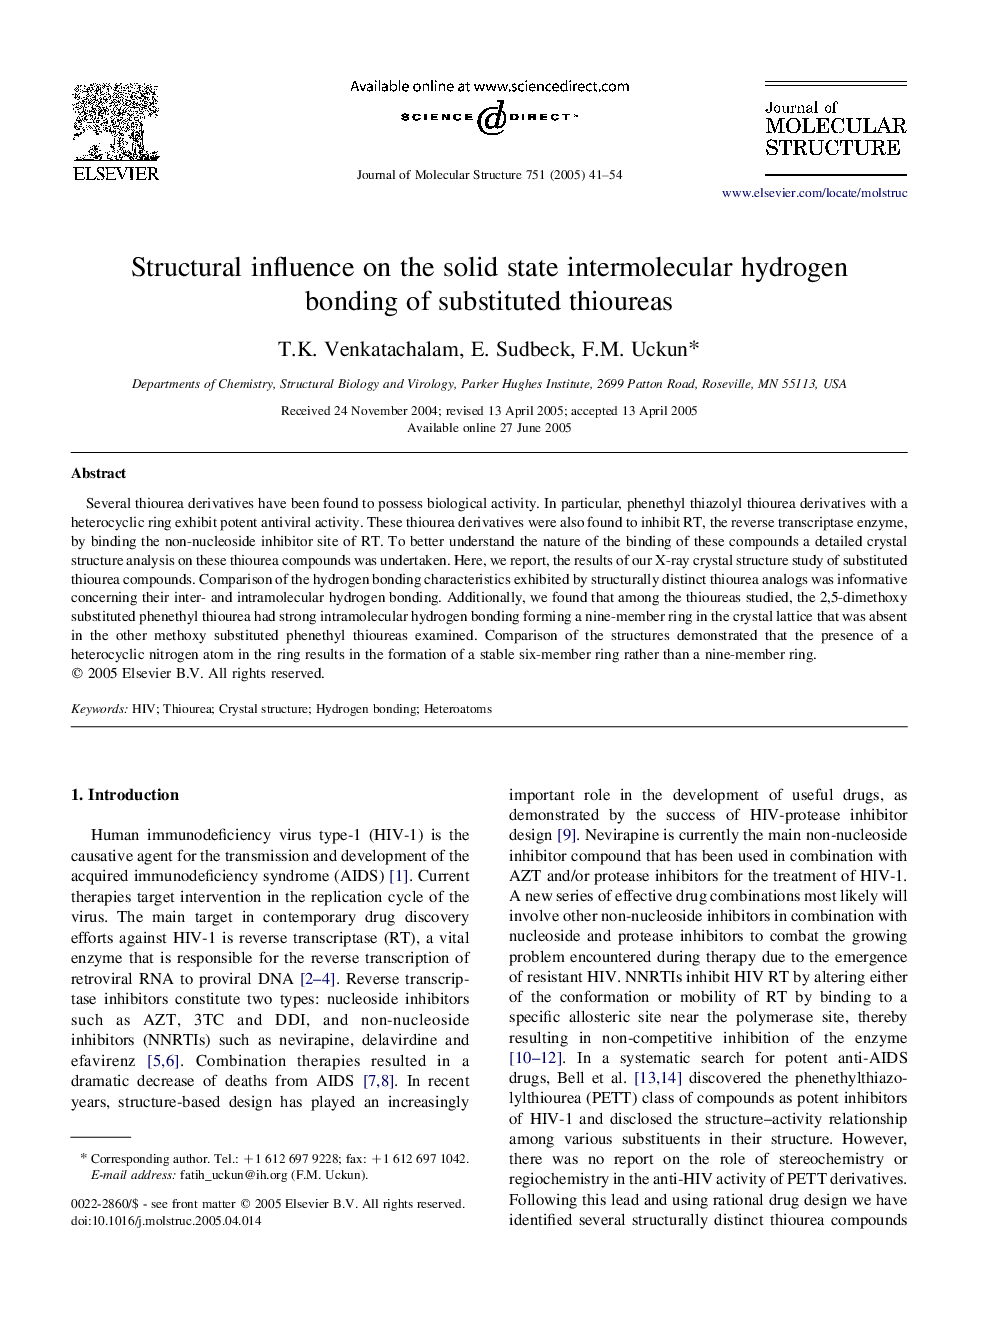 Structural influence on the solid state intermolecular hydrogen bonding of substituted thioureas